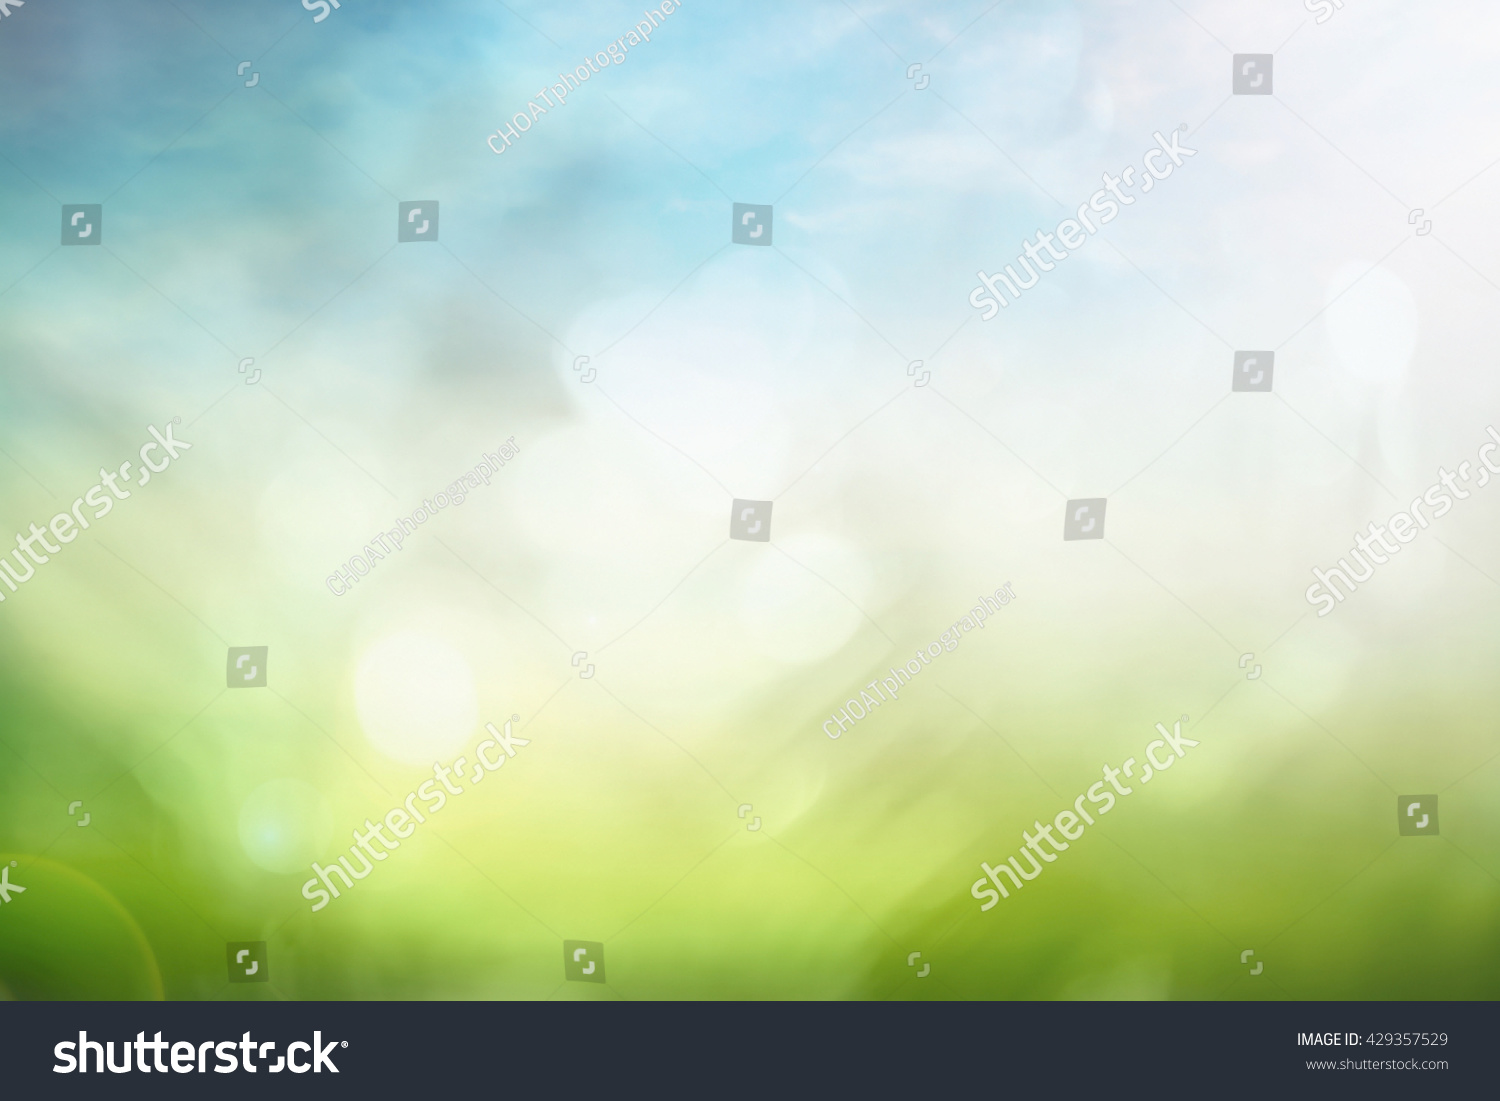 World environment day concept: Abstract blurred beautiful green nature with blue sky and white clouds wallpaper background #429357529